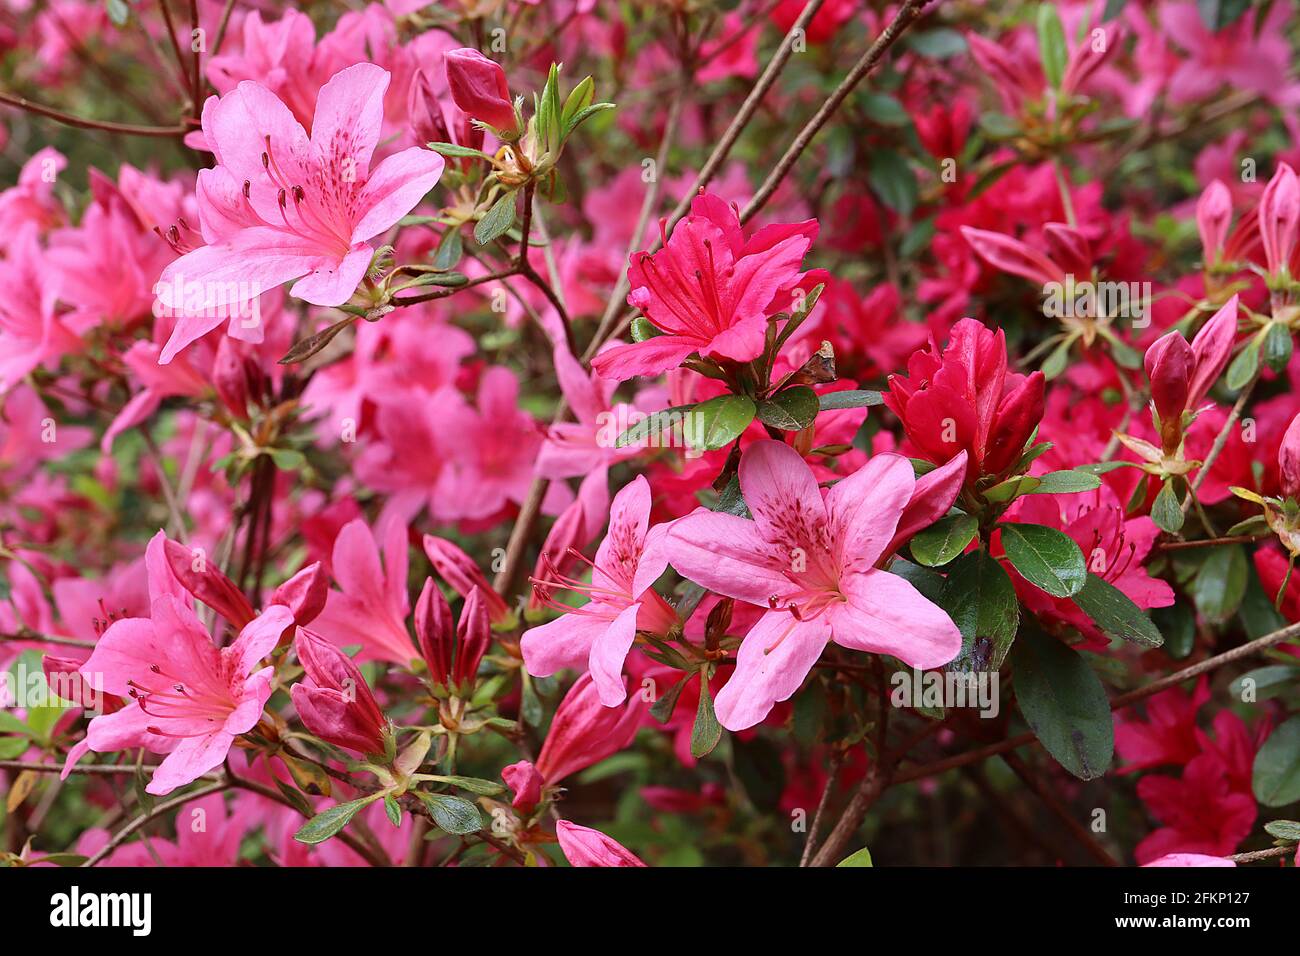 Azalea / Rhododendron ‘Kirin’ or ‘Daybreak’ (Wilson 22) and ‘Hinode-giri’ or ‘Red Hussar’ (Wilson 42) Small pink and crimson red funnel-shaped flowers Stock Photo